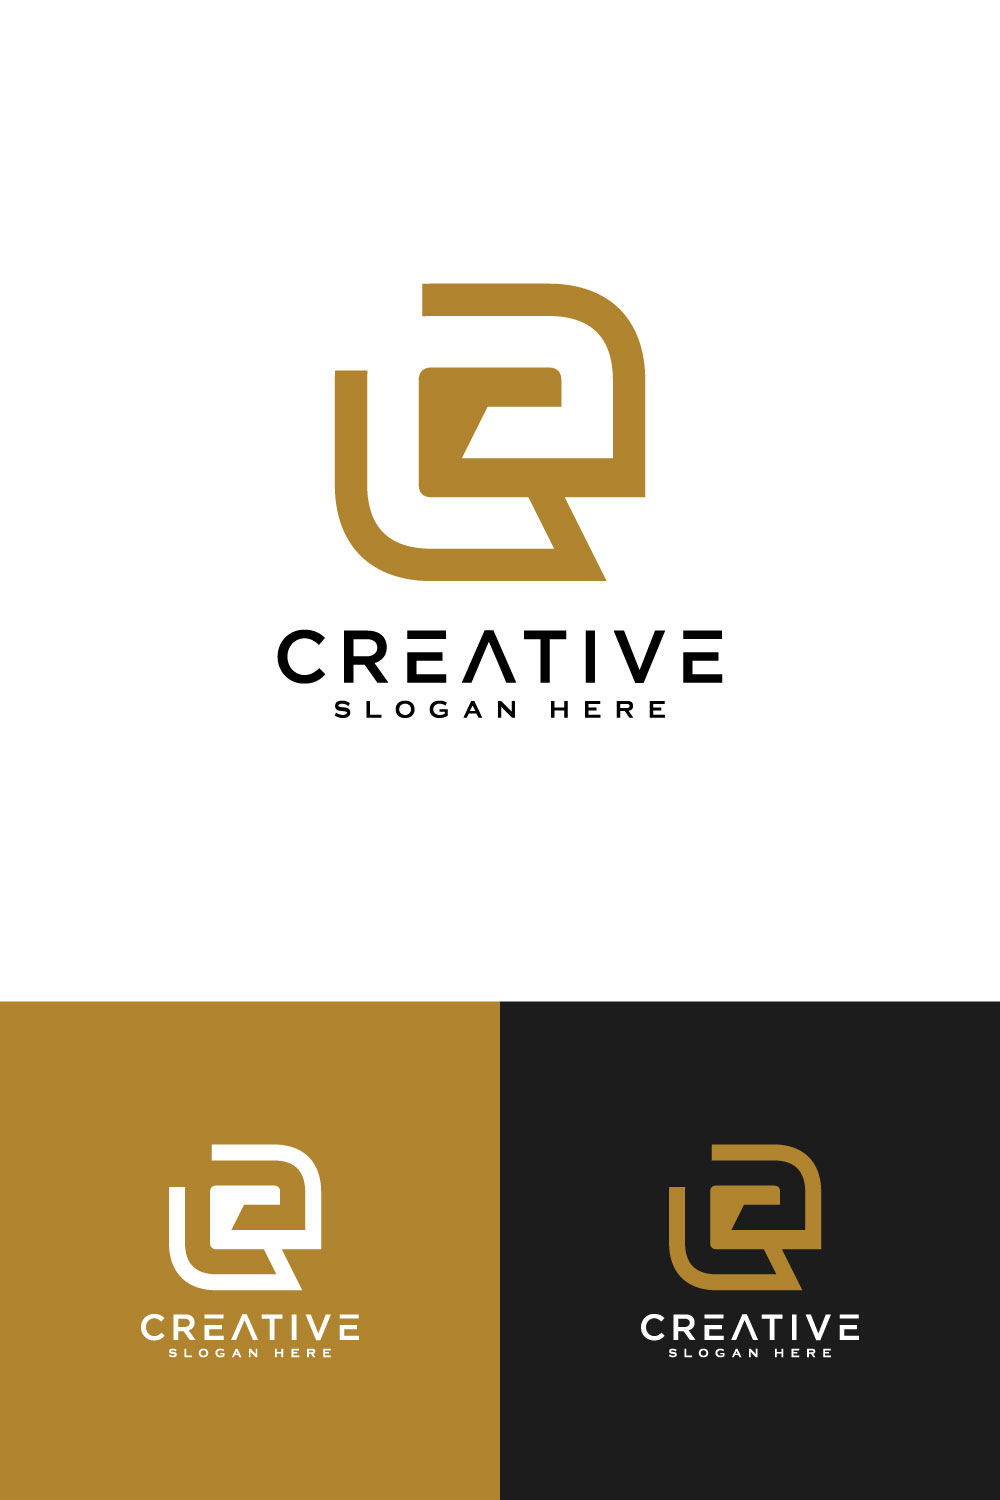 C3 Logo designs, themes, templates and downloadable graphic elements on  Dribbble